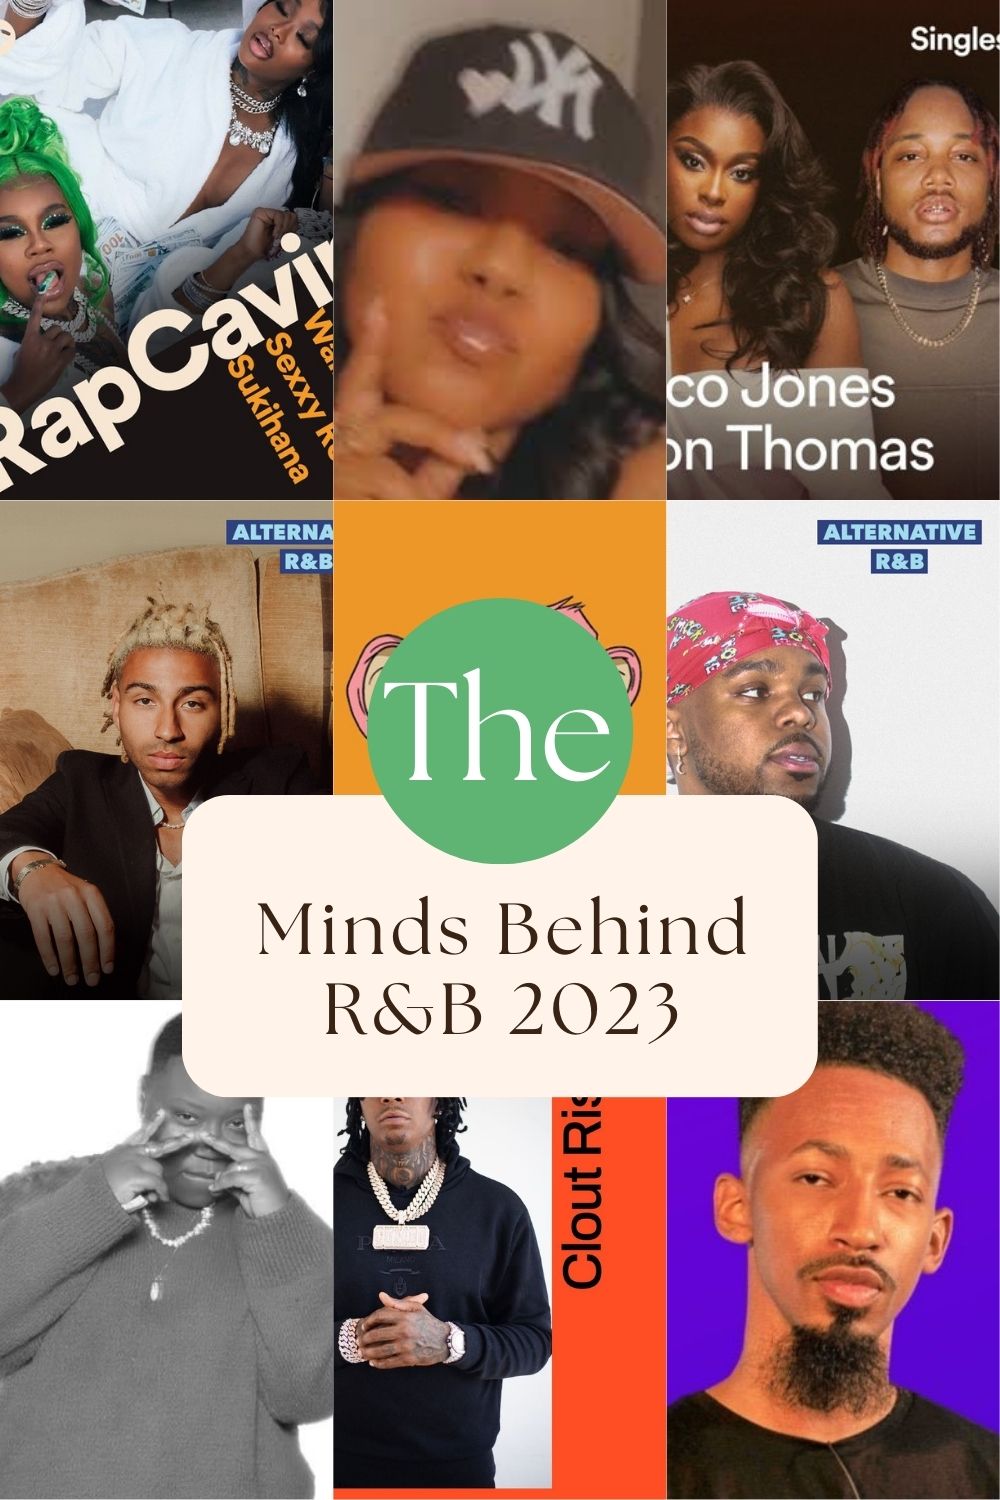 Music| With R&B Being A Leading Genre 2023, Here Are the Brilliant Minds Pushing Emerging Artists Forward: Yan Snead, Alaysia Sierra, Melknee, IAmKeithan & more